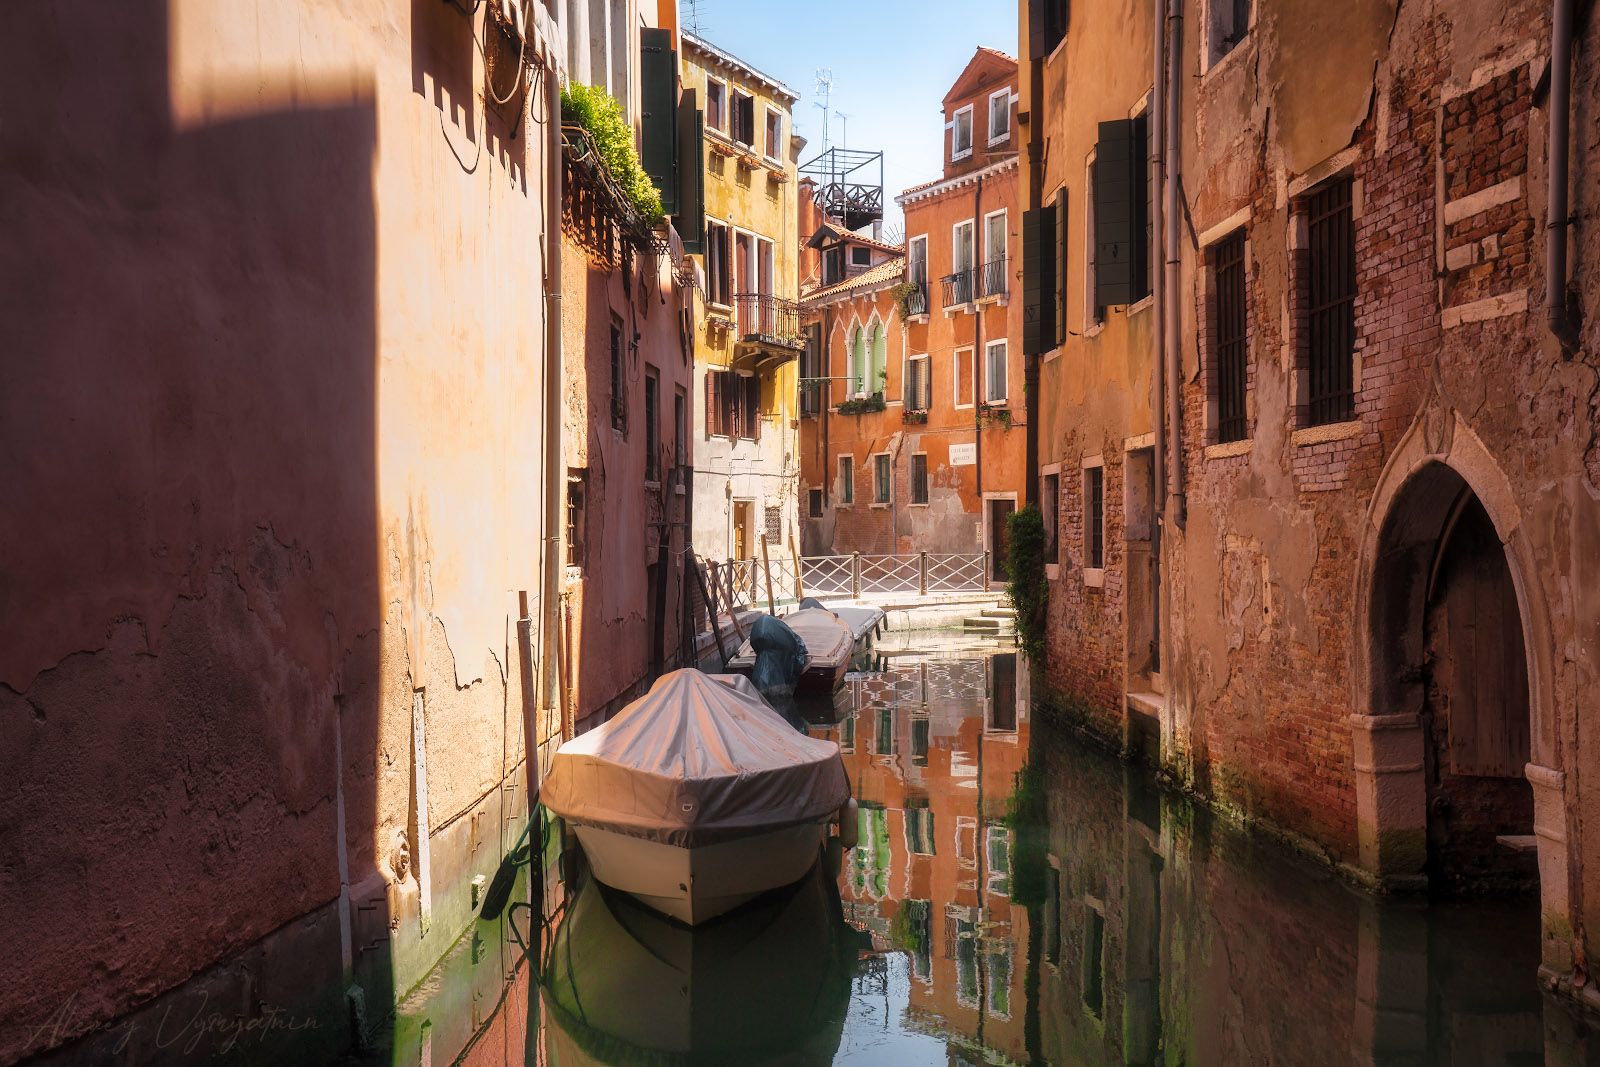 italy, venice, sunny, urban, outdoor, cityscape, boats, channels, water, old city, Алексей Вымятнин